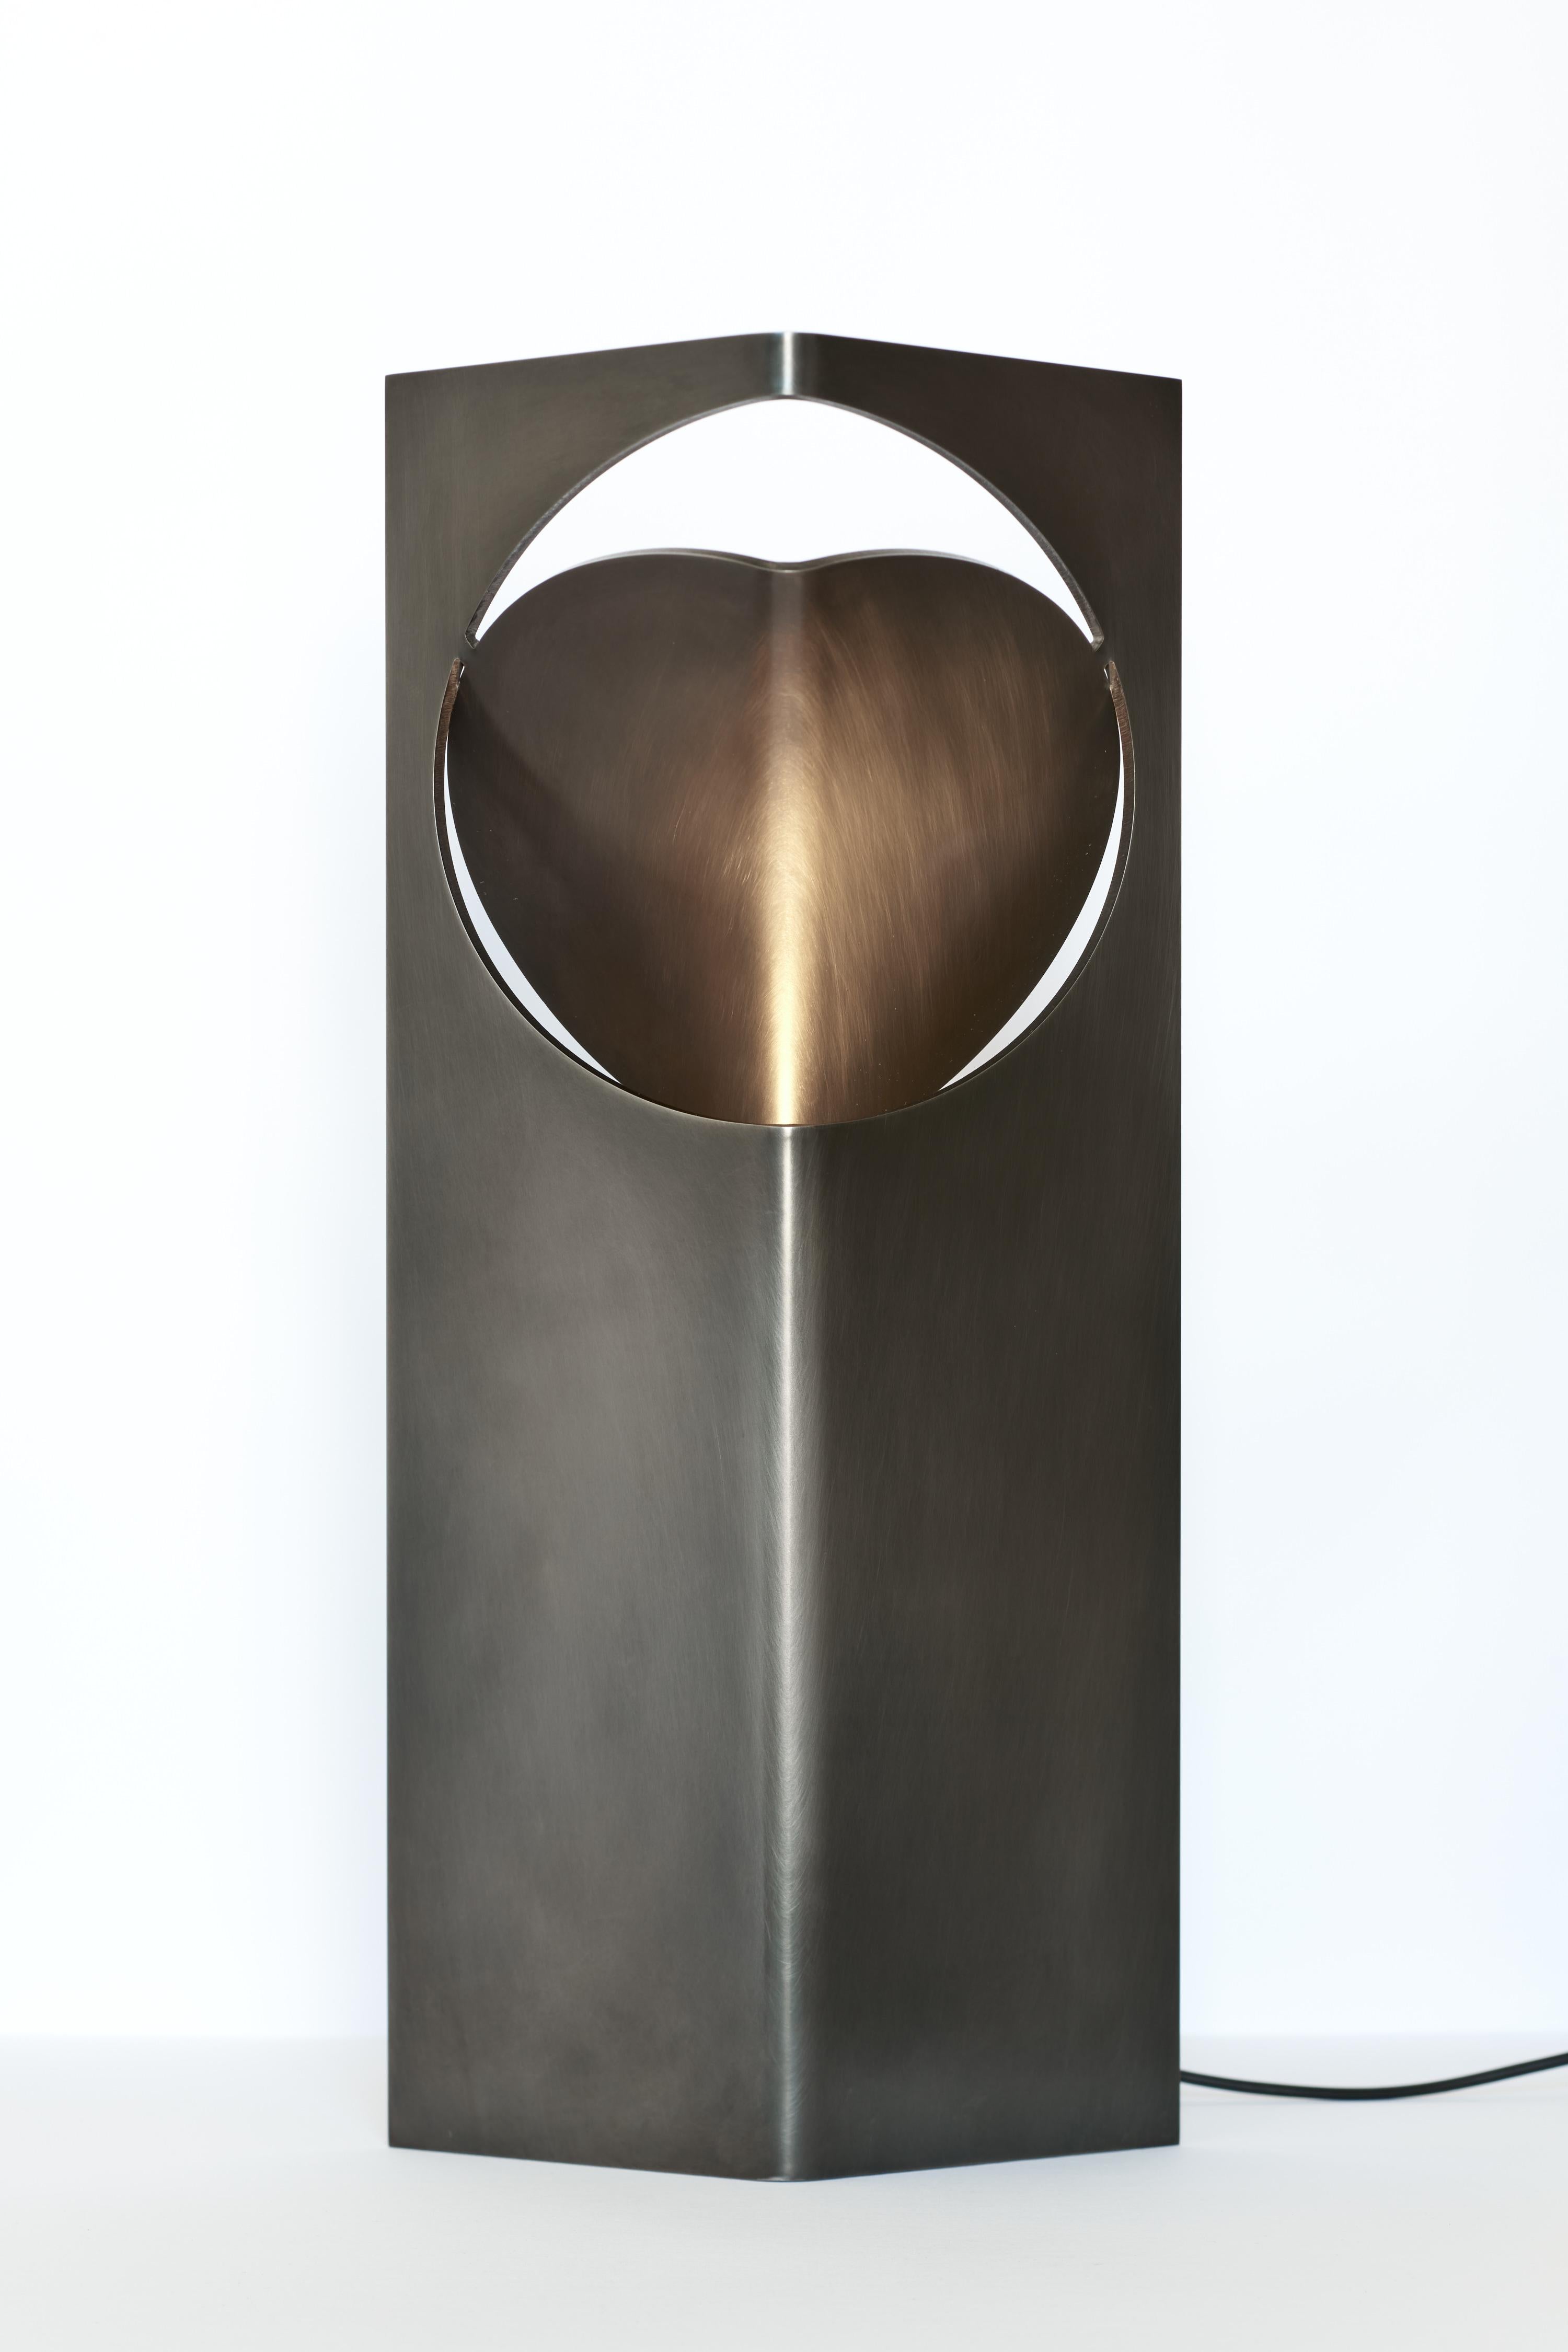 The ONE Table Light collection by Frank Penders is a series of lights that combine an ingenious simplicity of form with a richness of light and material texture. Featuring a hand brushed stainless steel design, this table light is the perfect